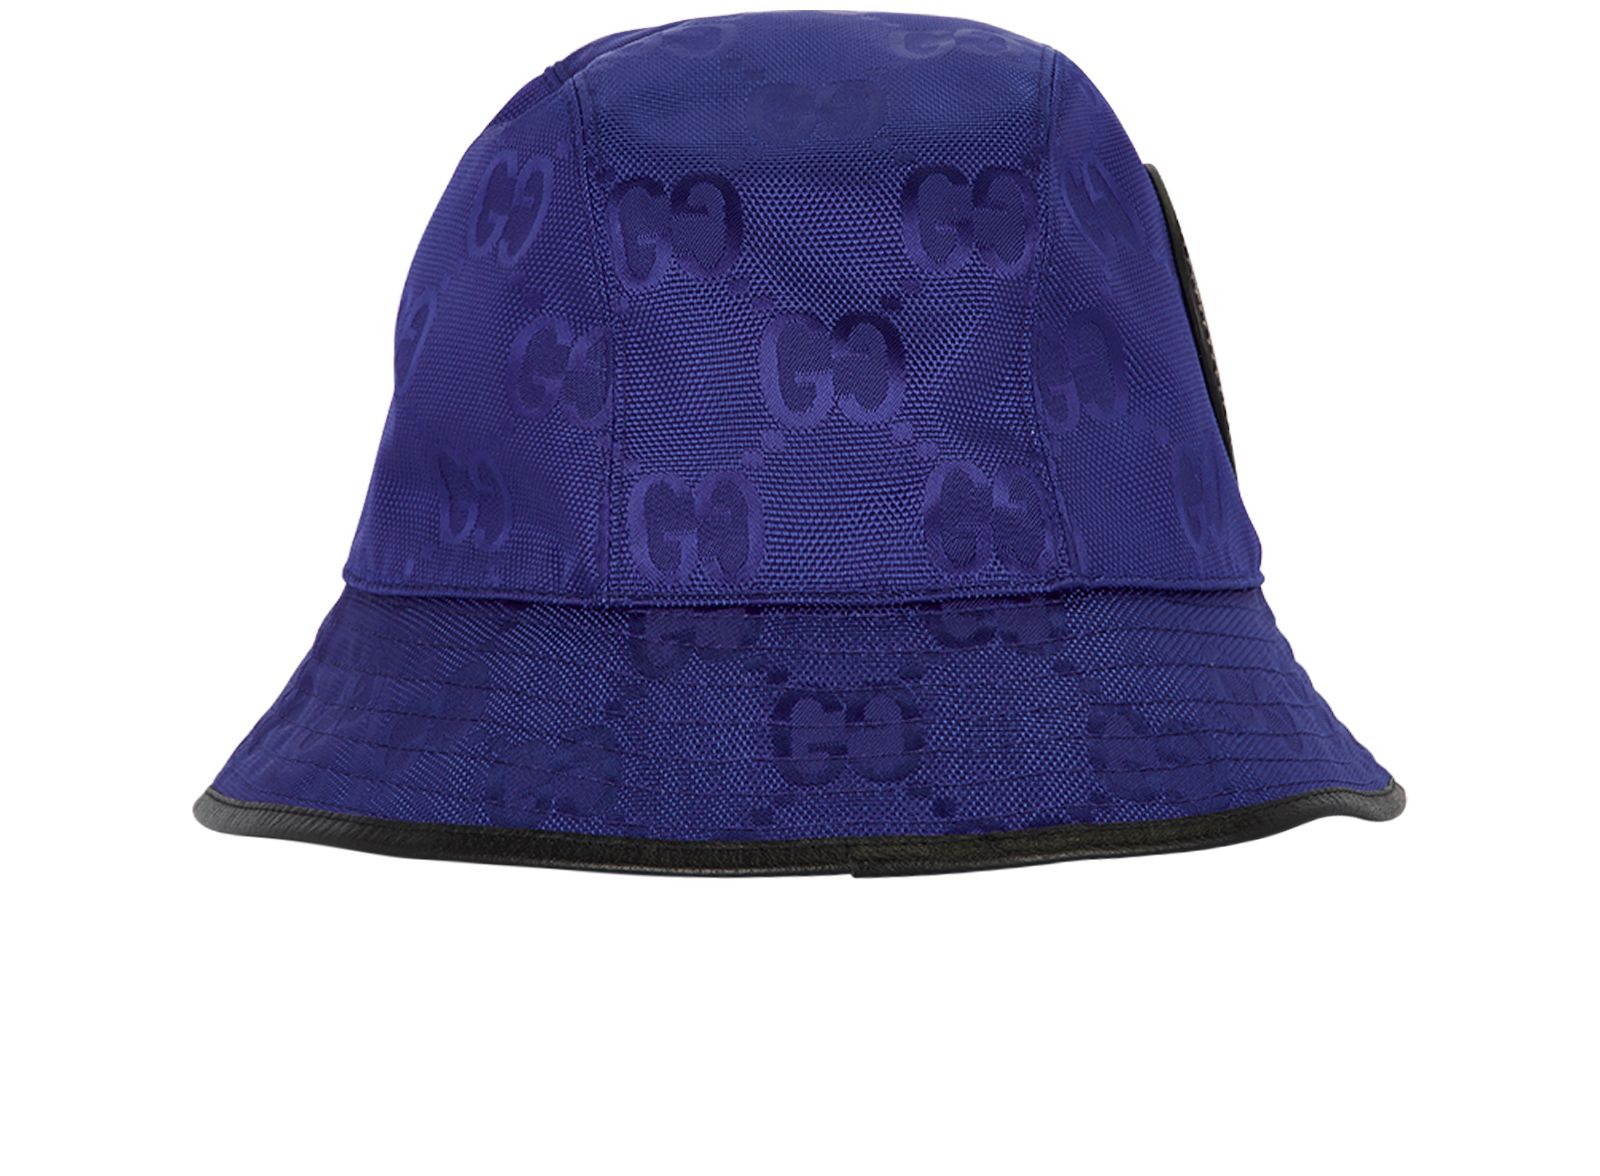 Gucci Off The Grid Bucket Hat Blue